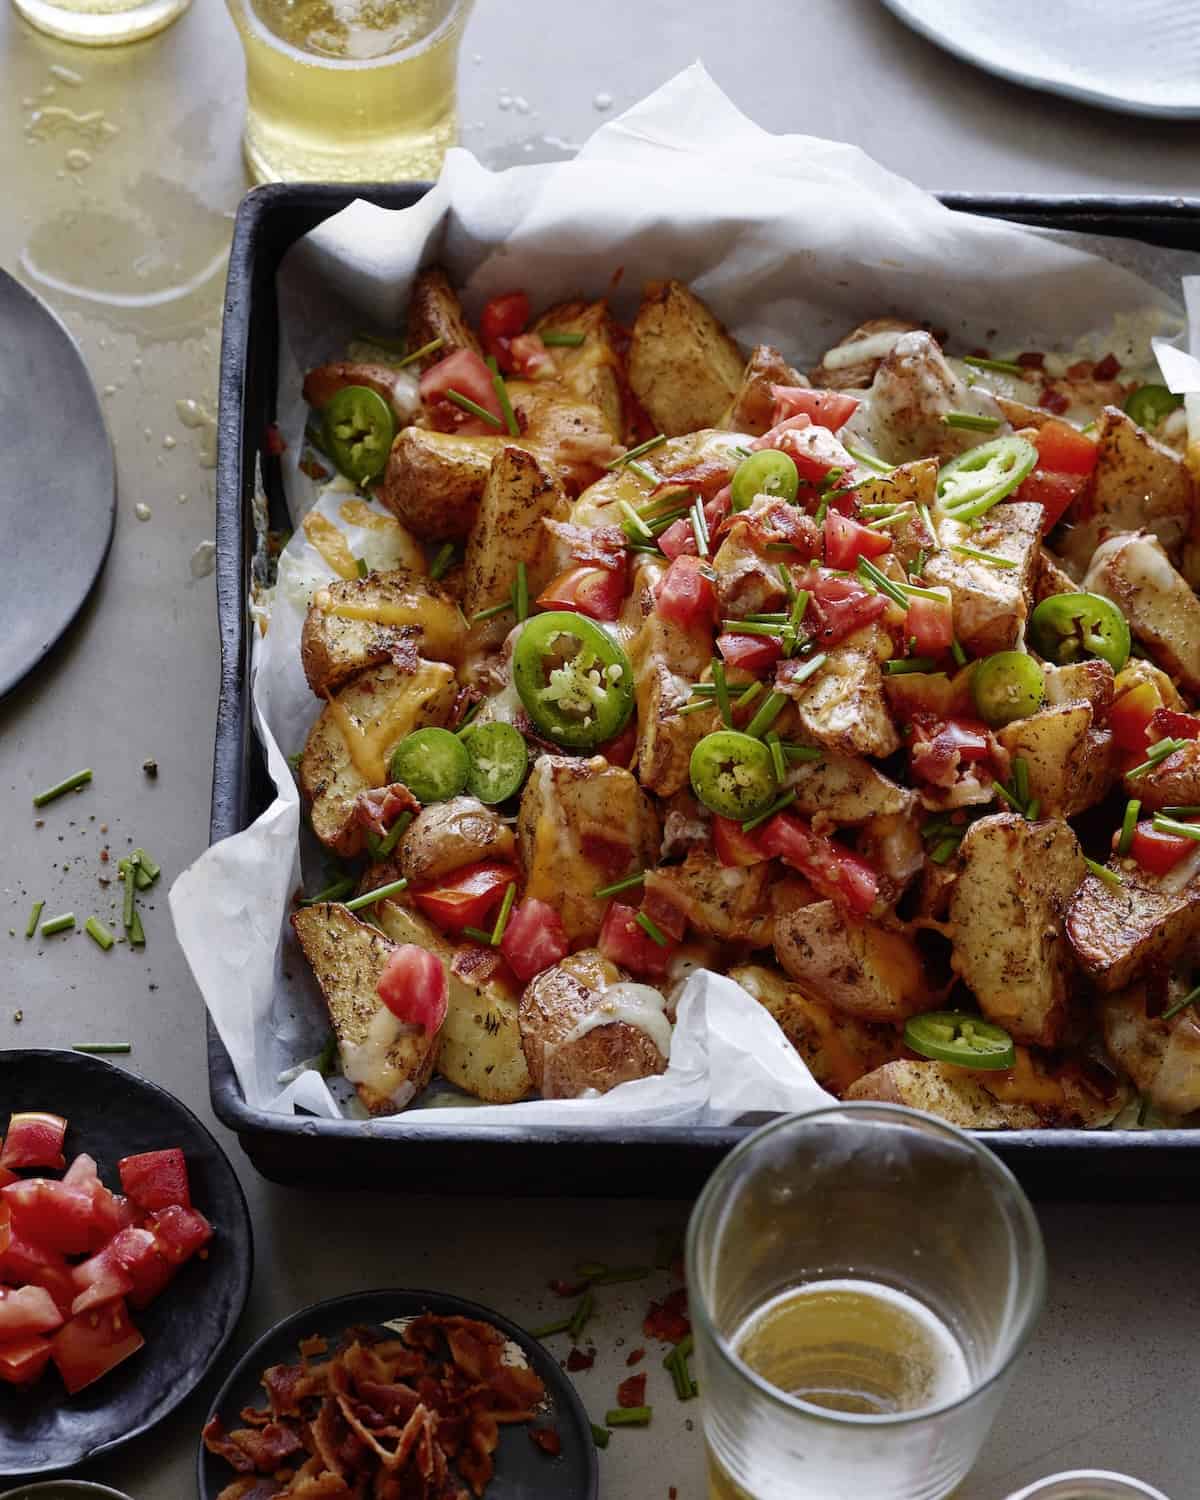 A rectangular baking sheet with jalapeño bacon loaded potatoes, with glasses of beer, and little dishes with chopped tomatoes and crumbled bacon on the side.